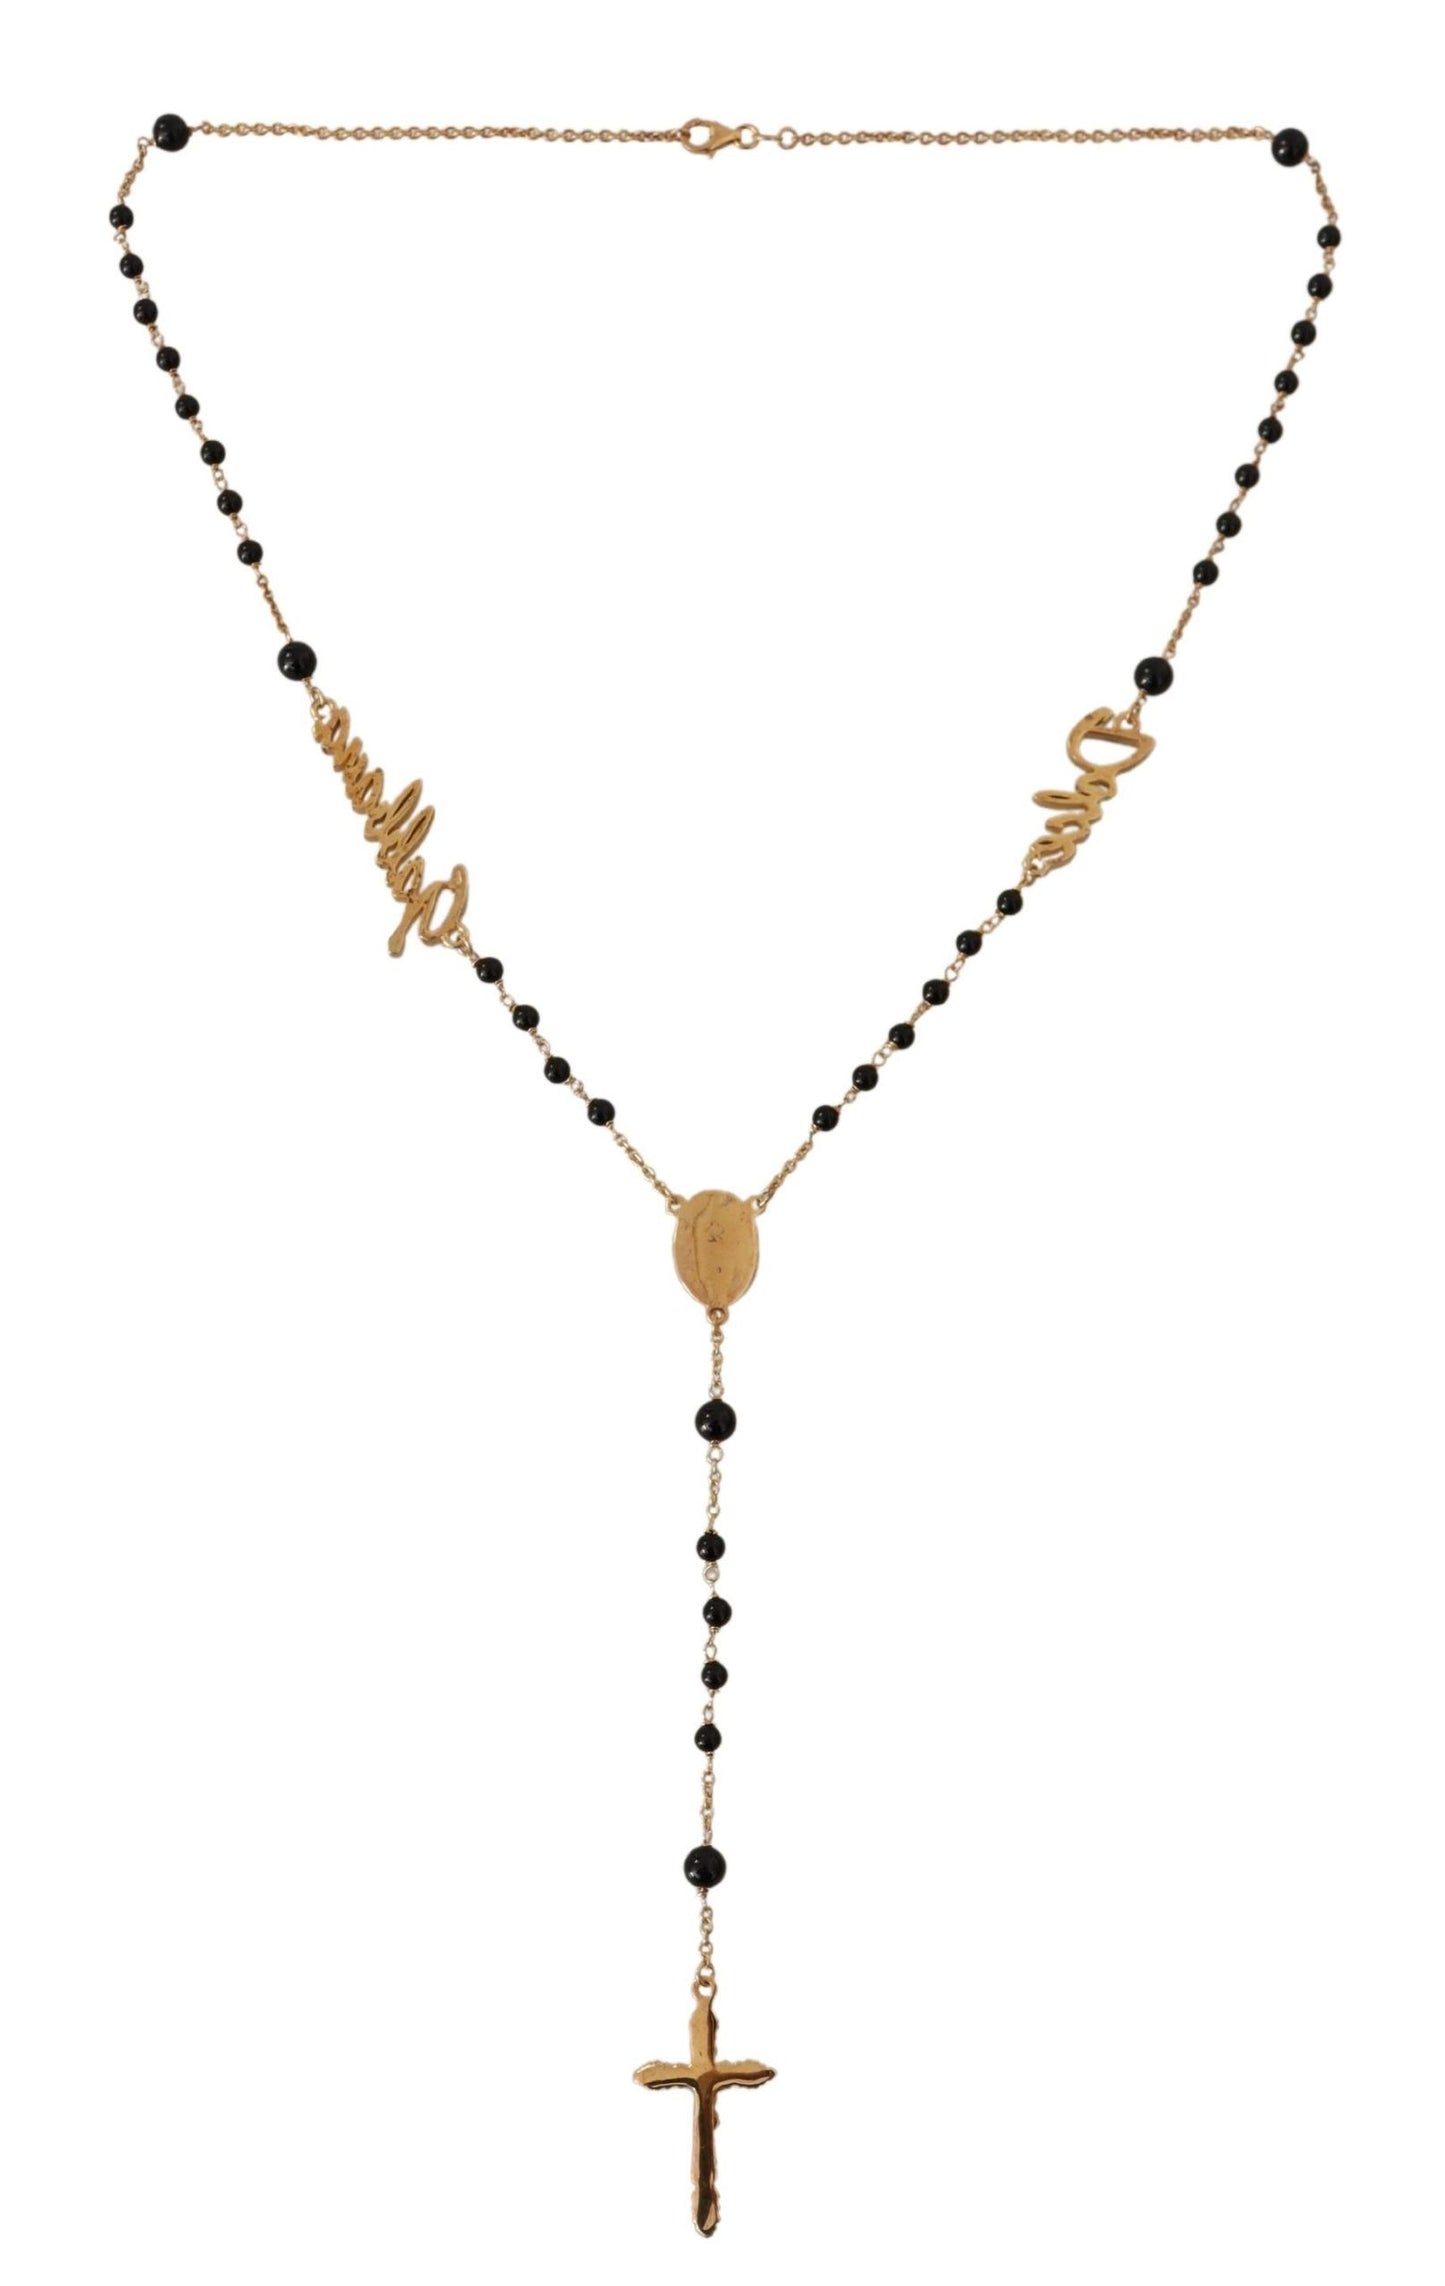 Elegant Gold-Plated Rosemary Necklace